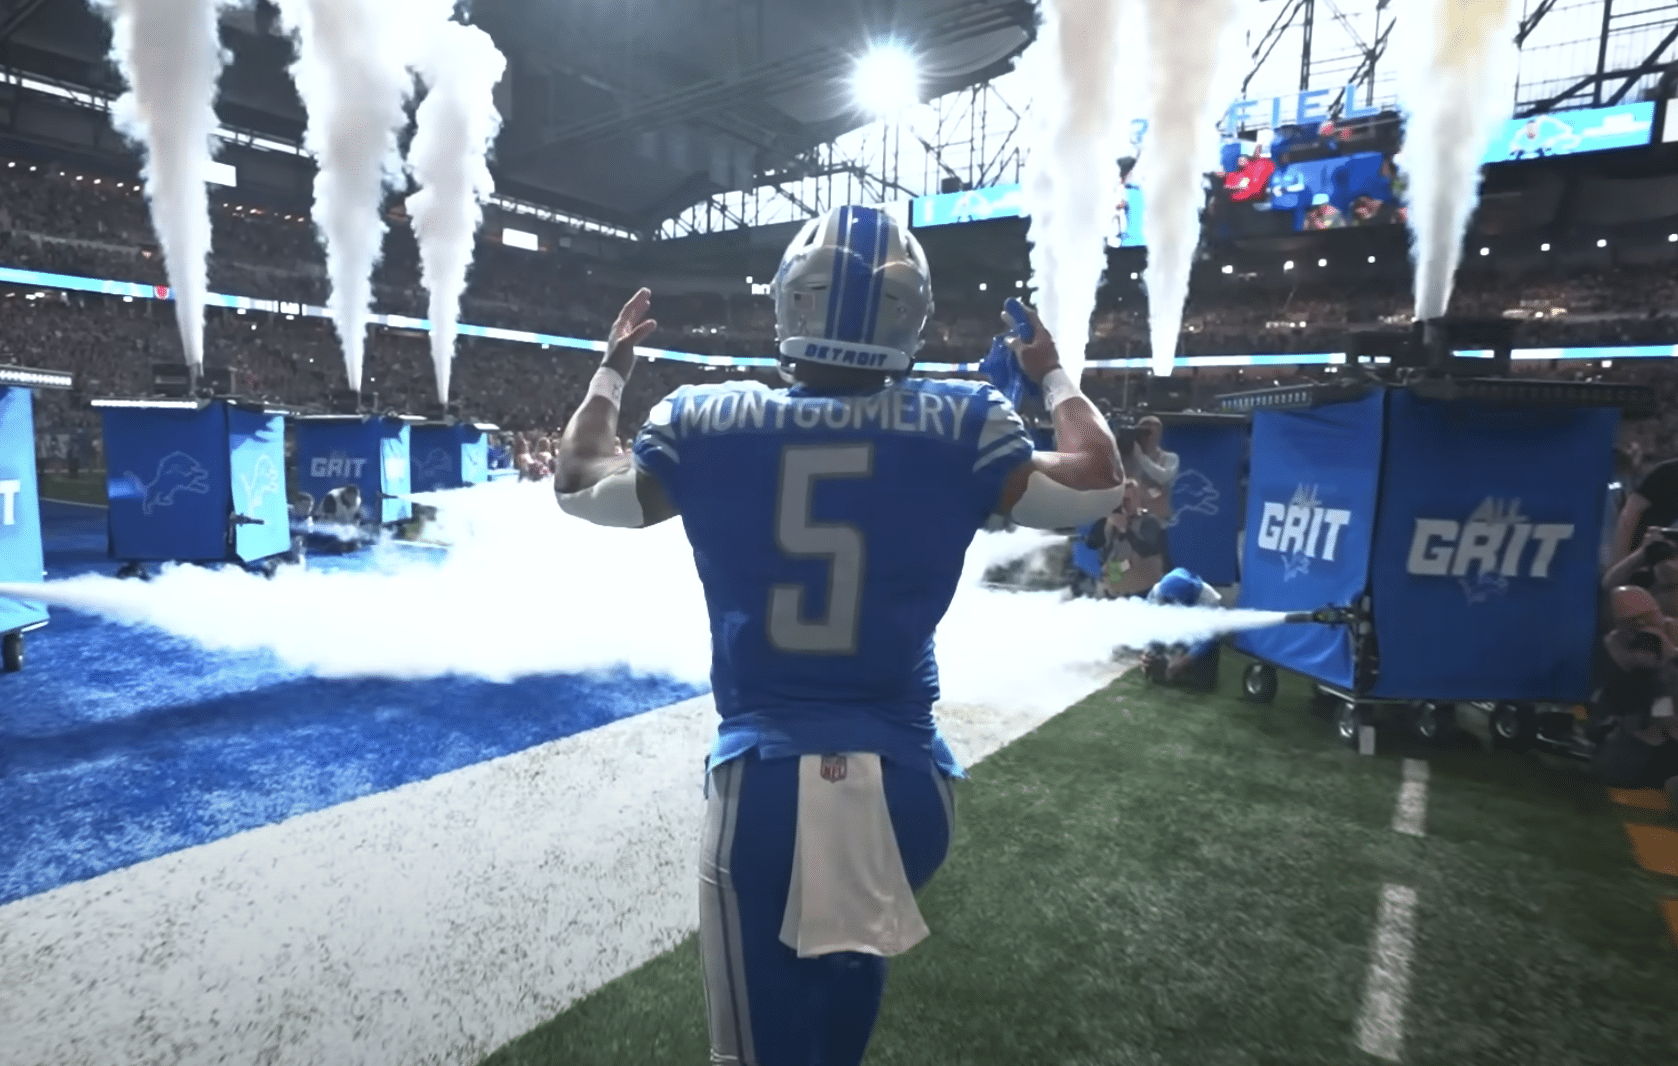 Detroit Lions Week 15 Rooting Guide David Montgomery and Jahmyr Gibbs have shot at history David Montgomery